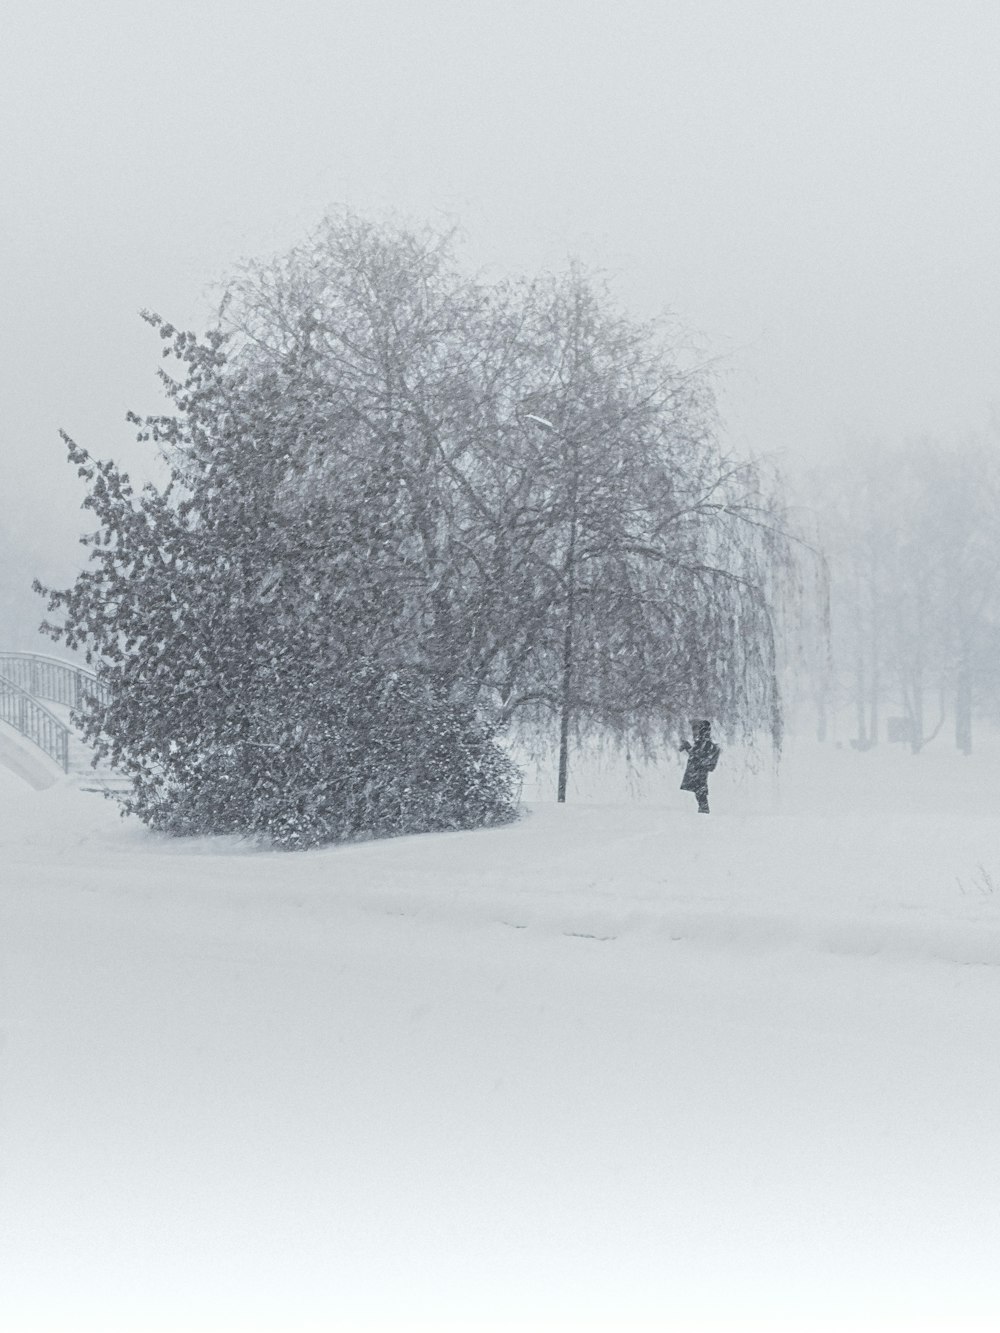 a person walking in the snow near a tree